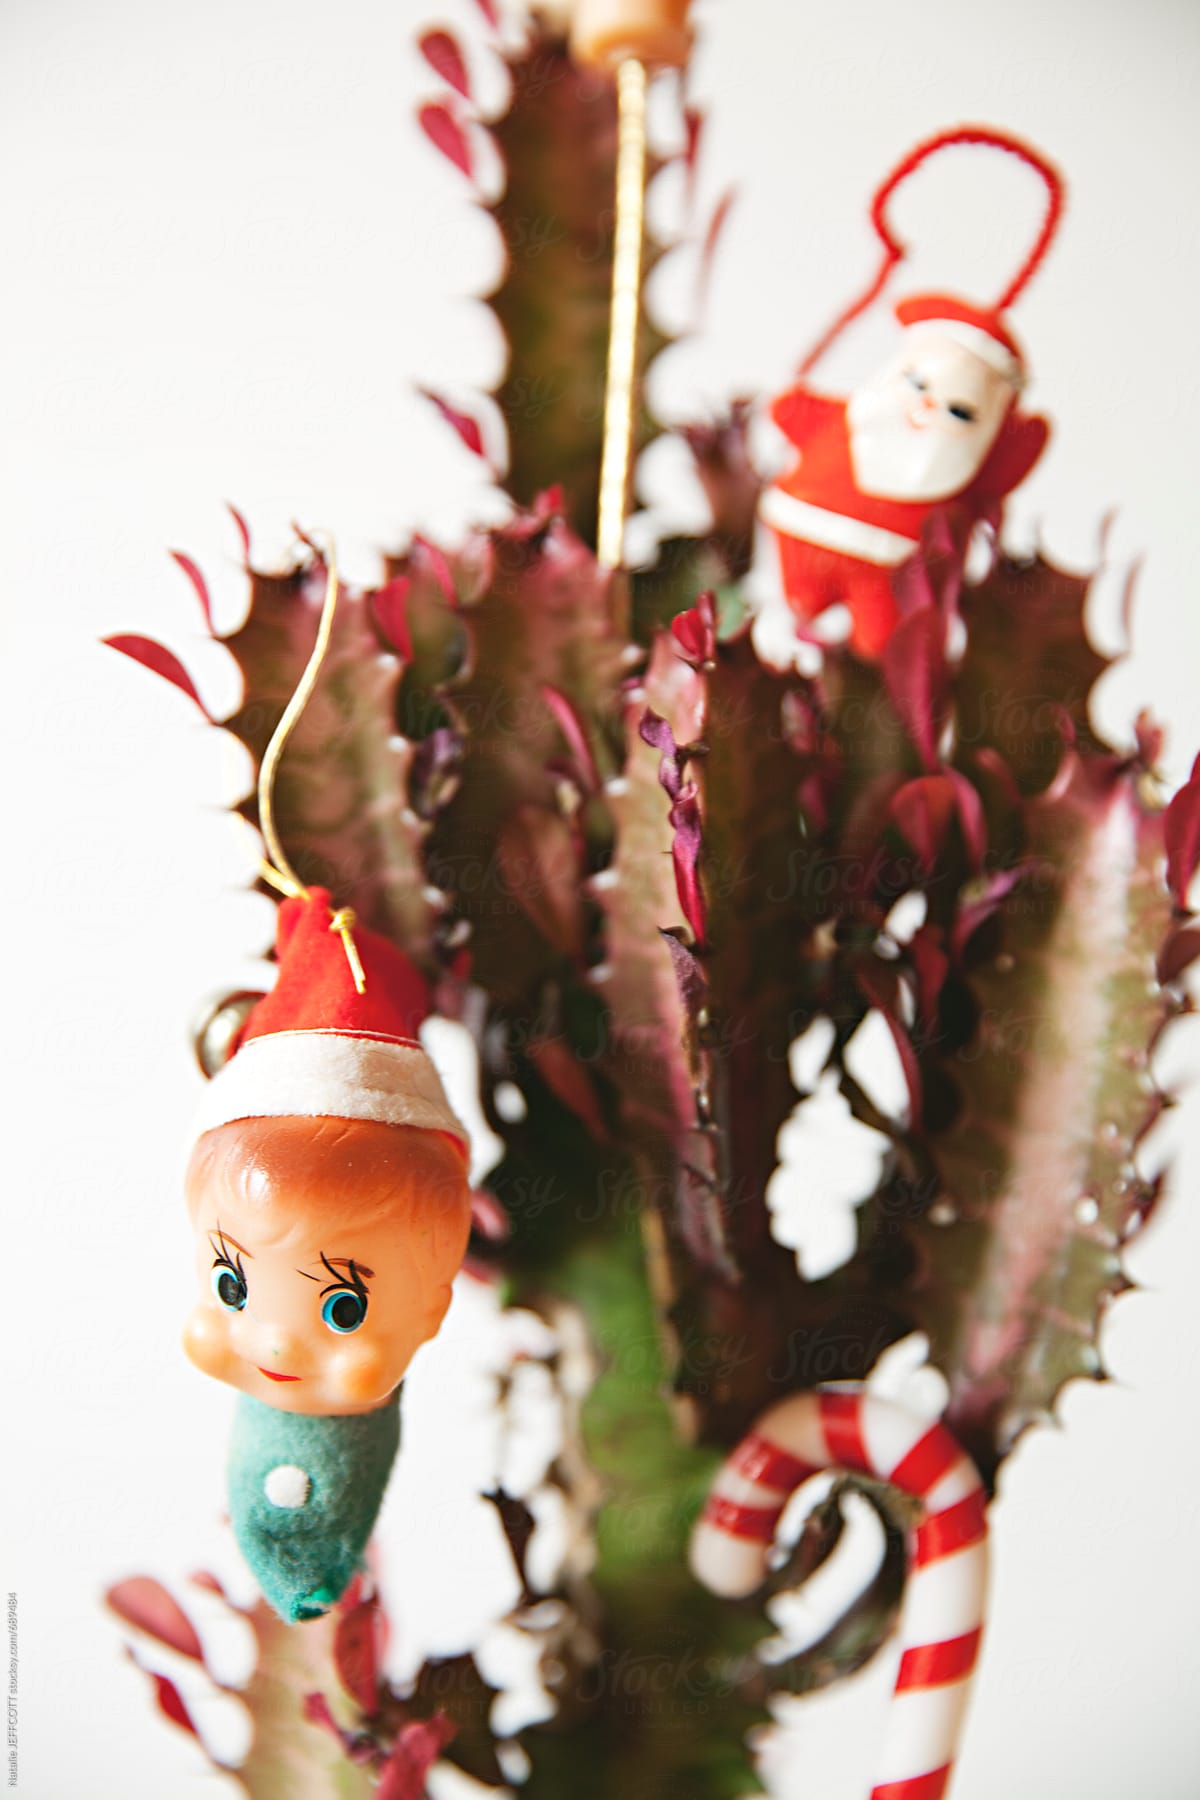 decorating a cactus / succulent for Christmas with vintage ornaments